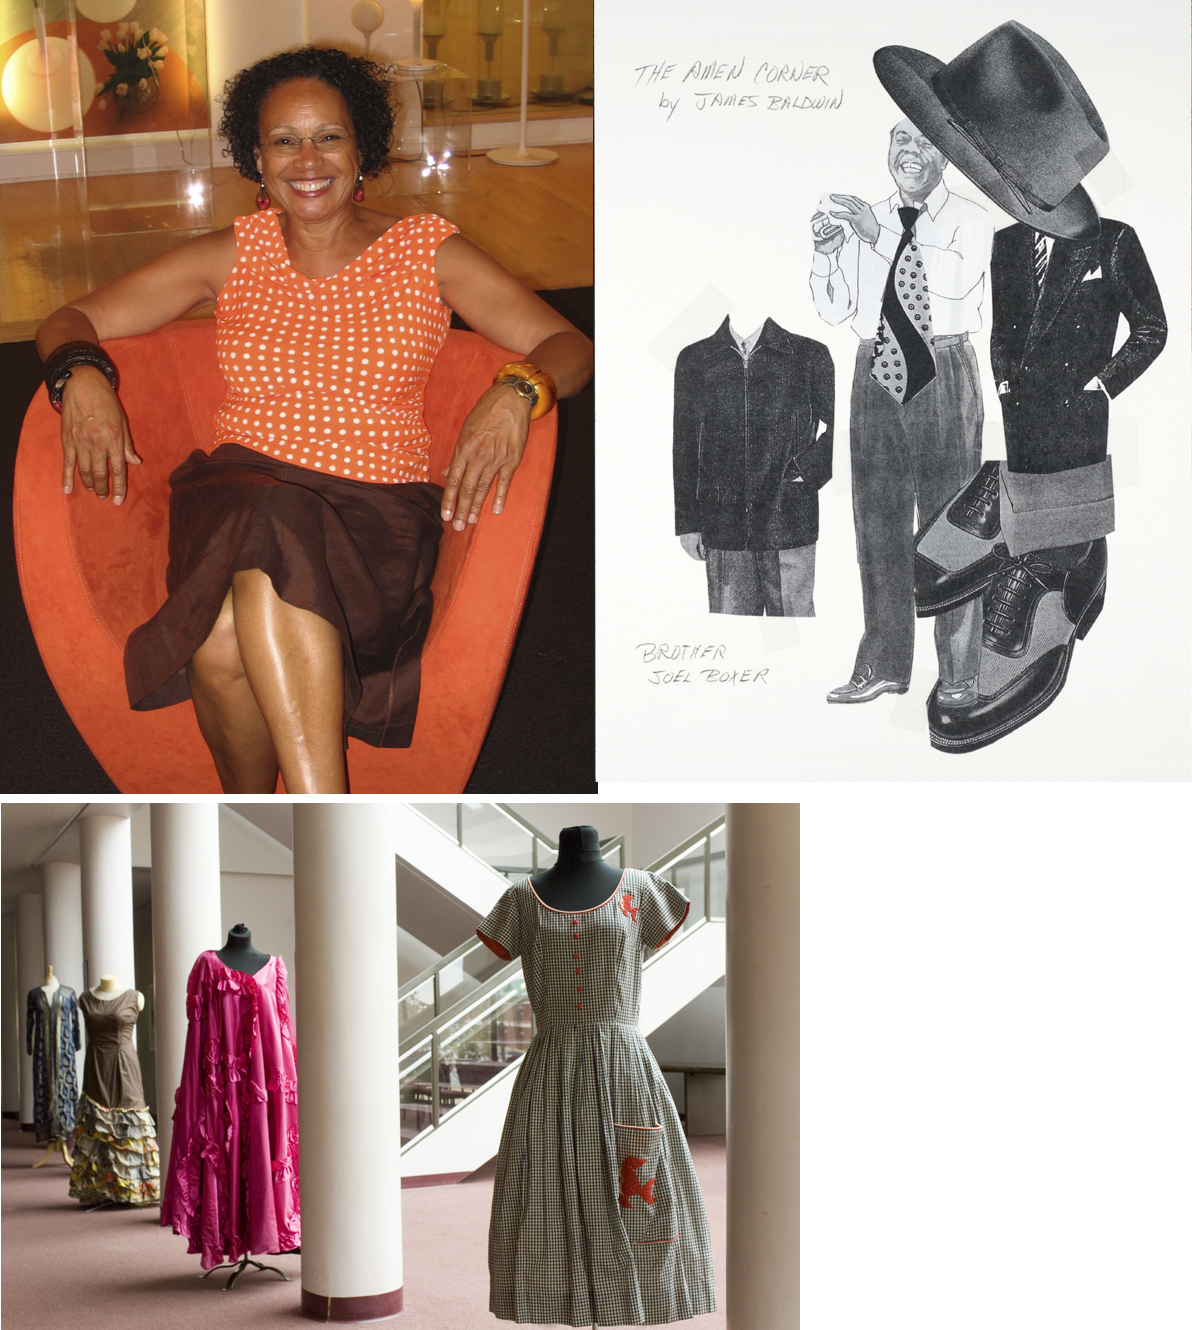 (Top, left) Myrna Colley-Lee, (Top, right) A costume rendering, and (Bottom photo) Costumes in the Colley-Lee Collection